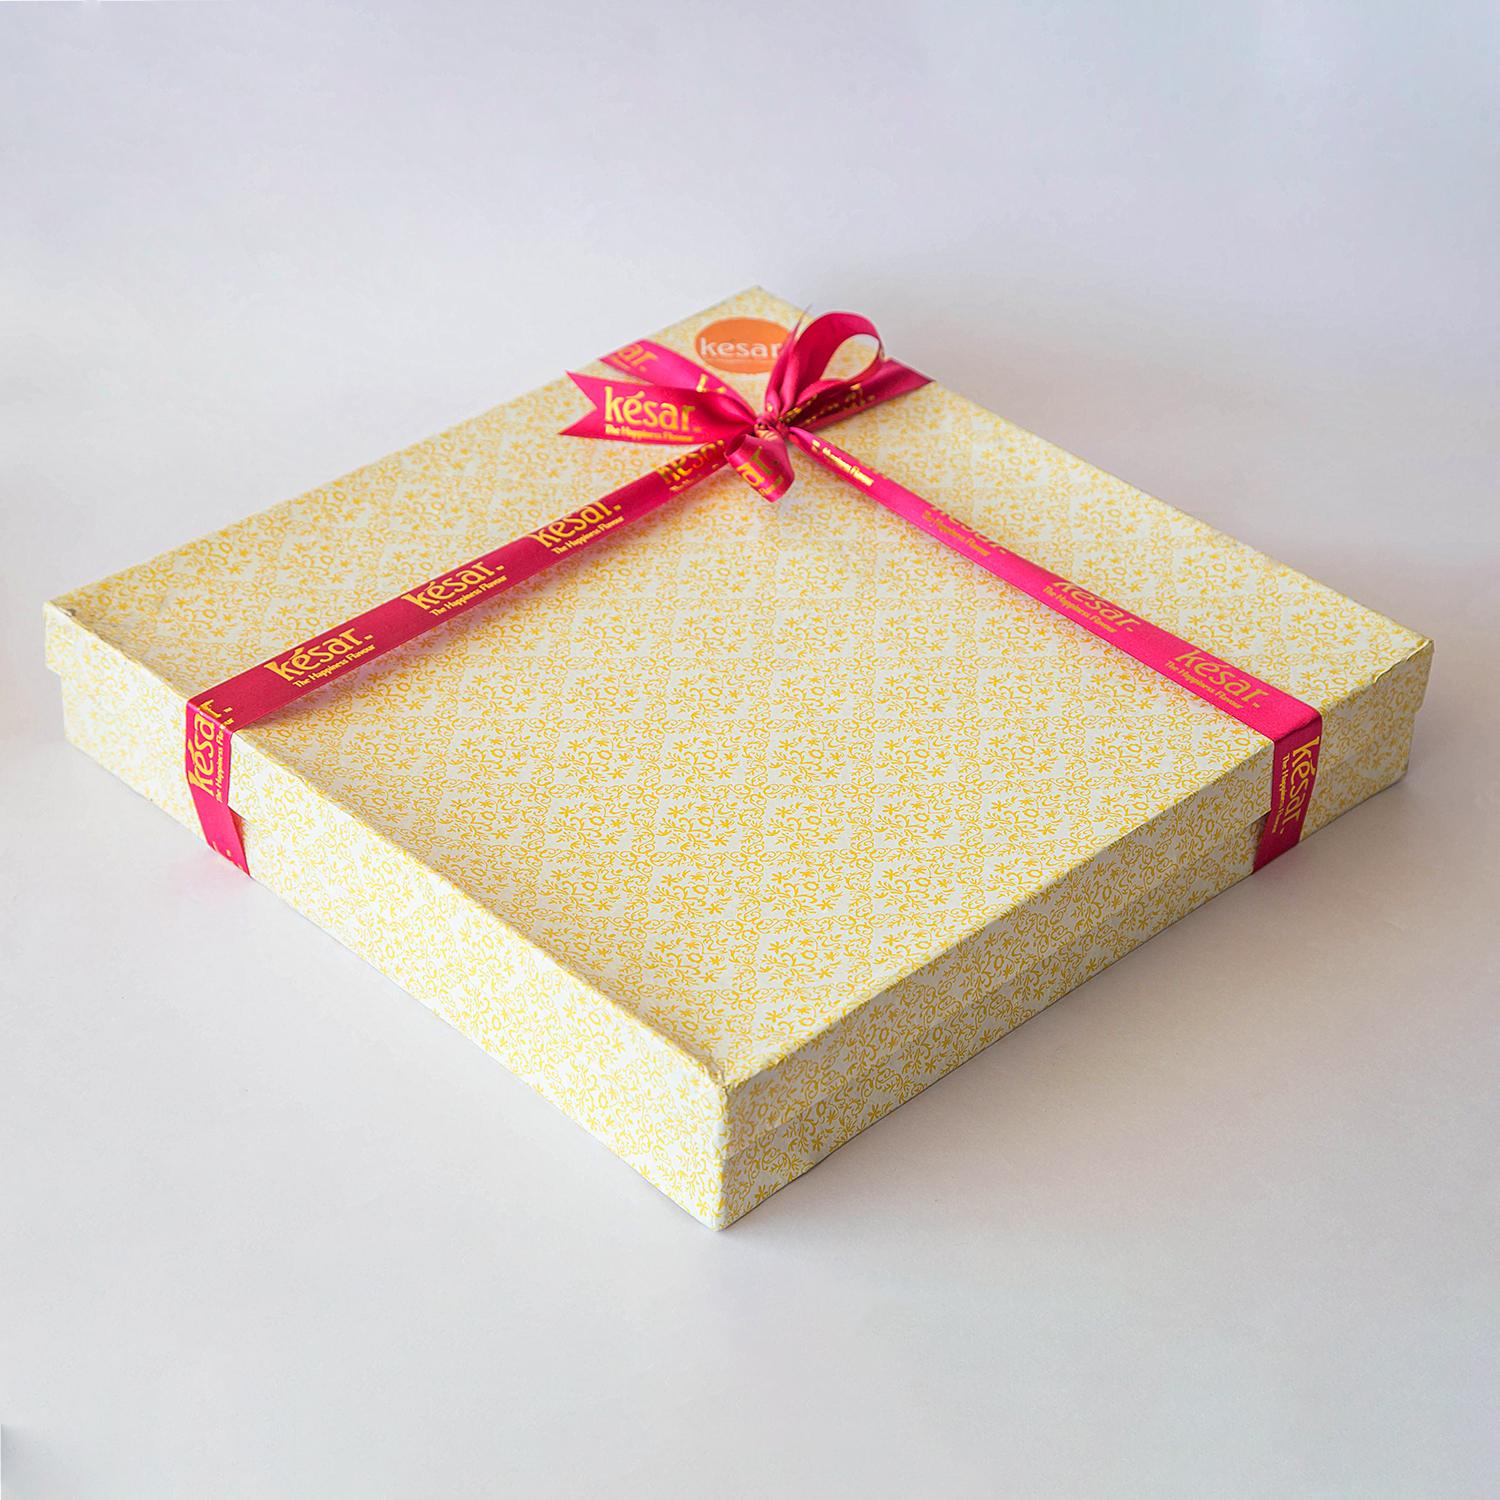 Gift Wrapping Love - Wrapped With Intention